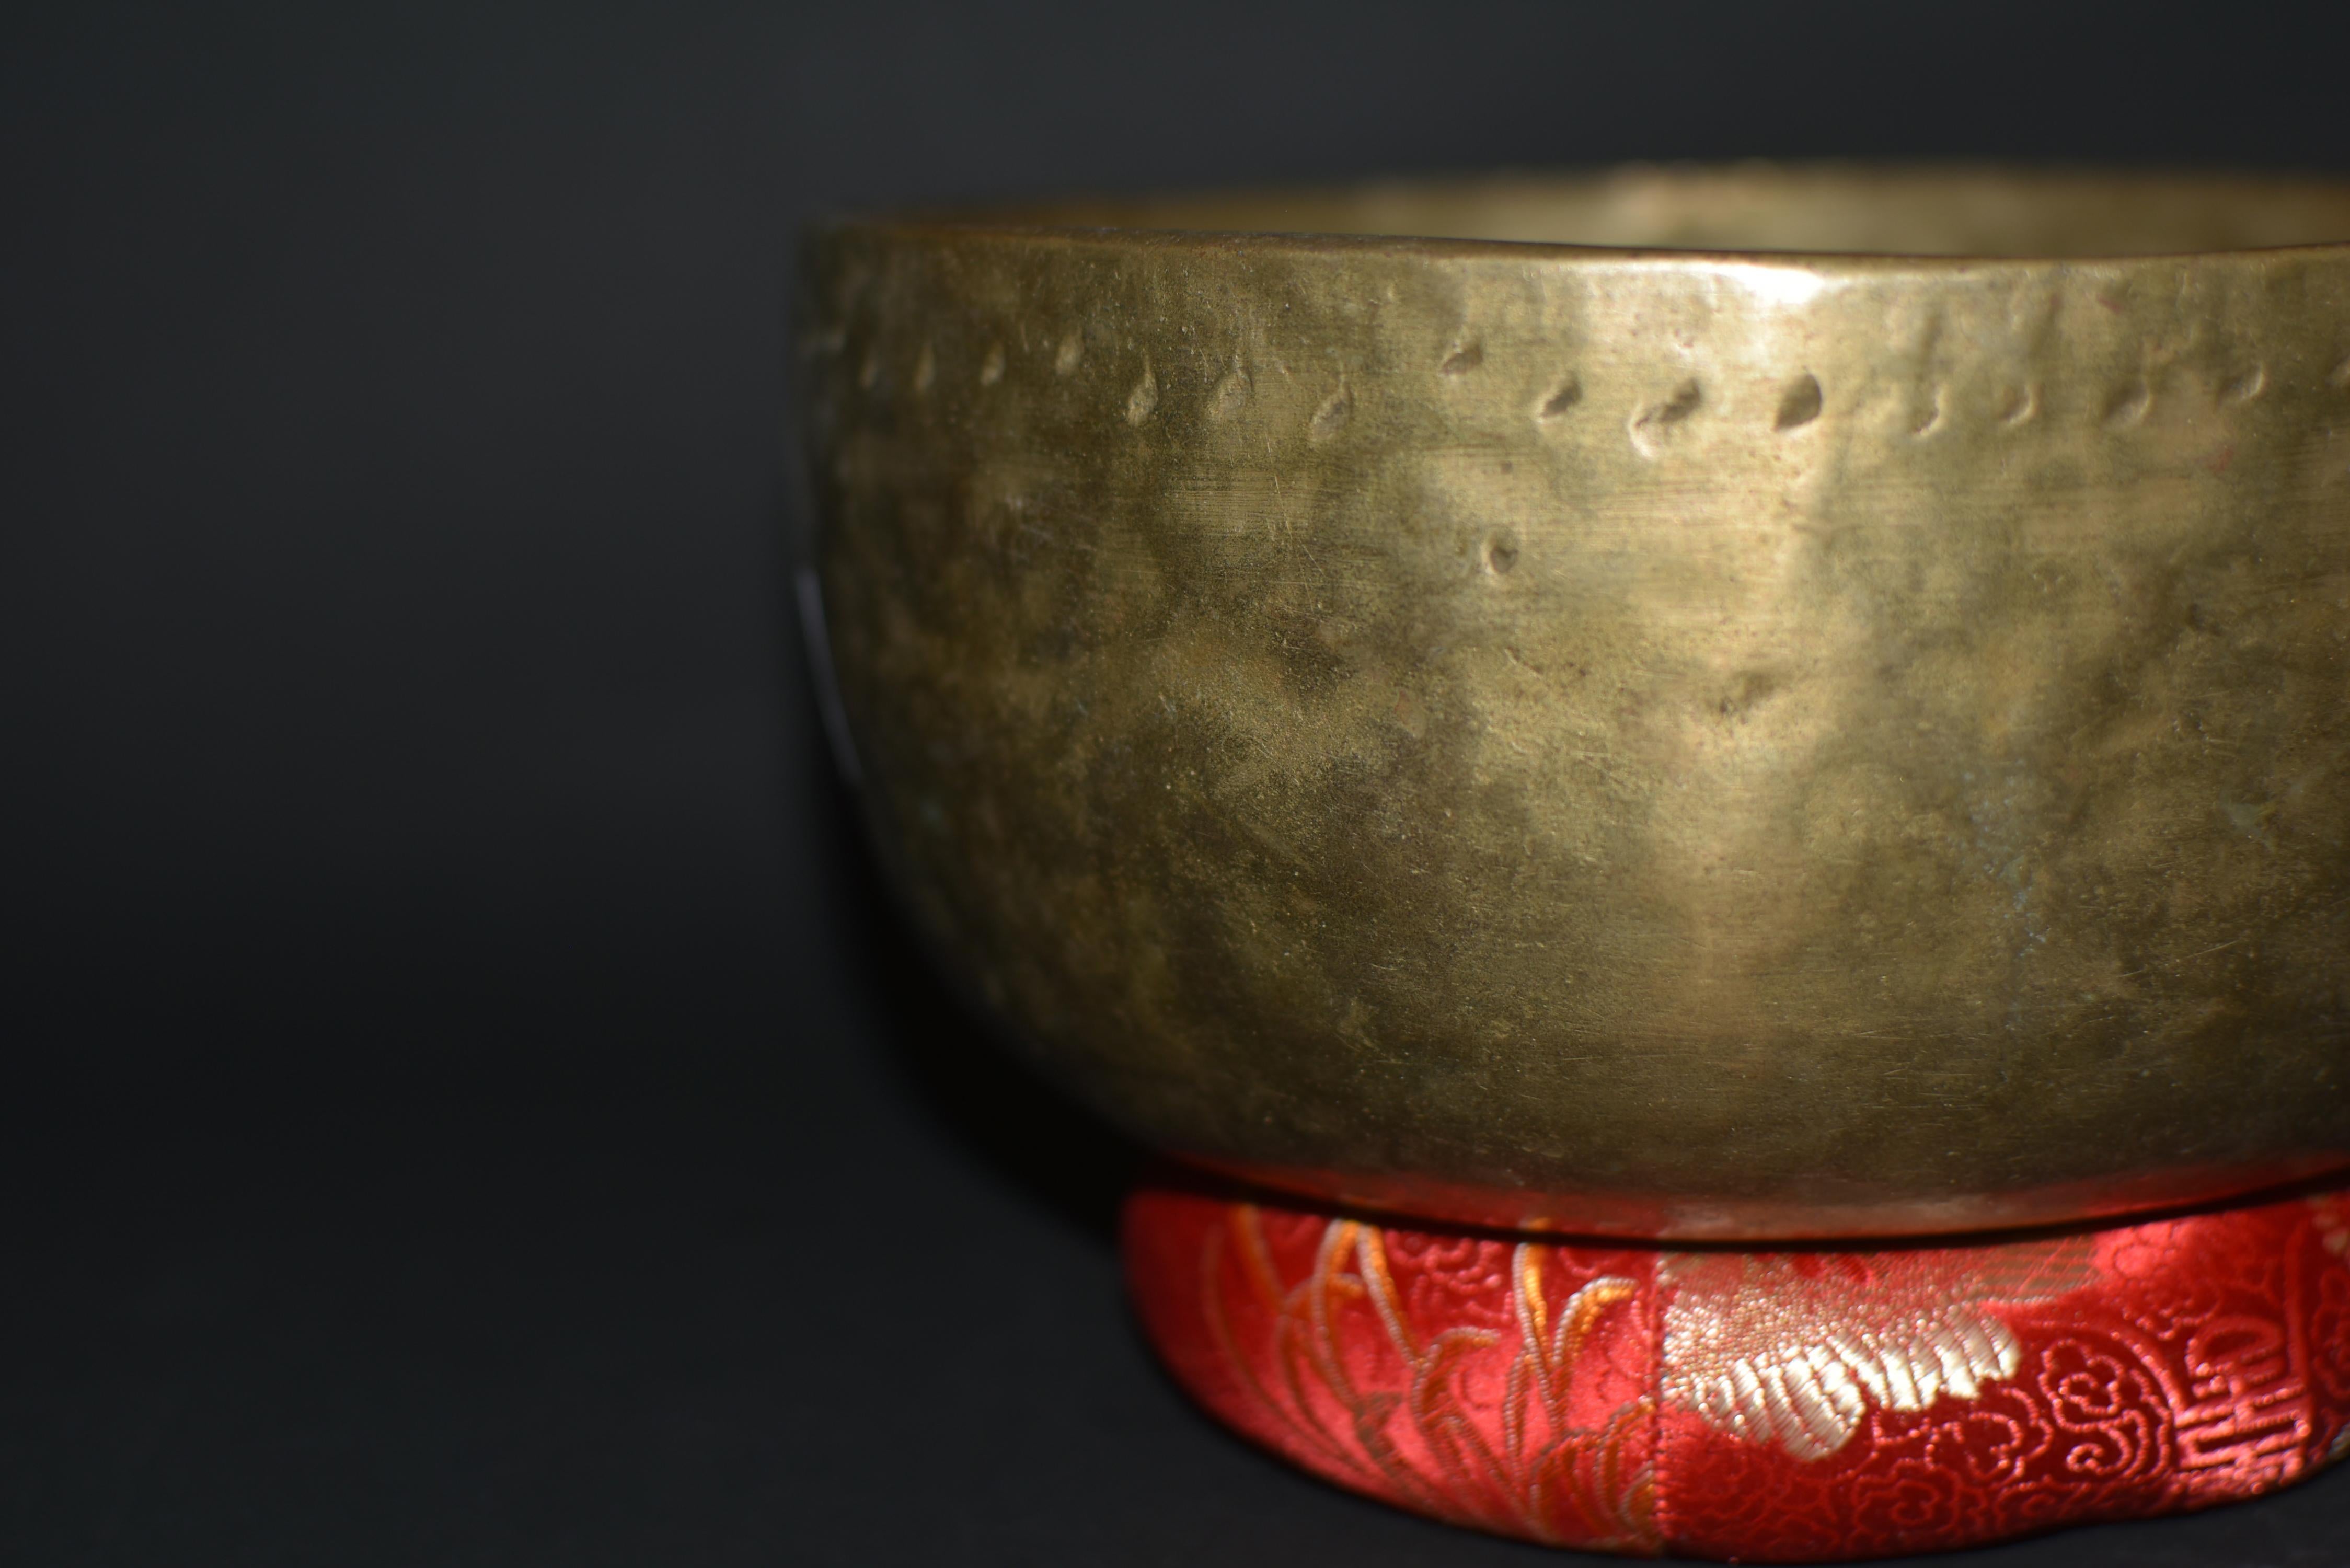 A beautiful, 19th century singing bowl from Bhutan. The hand made piece is free of extravagant decorations except a row of hand cut crescent motifs under the exterior rim. The crescent moon symbolizes clarity and modesty. A meaningful ceremonial